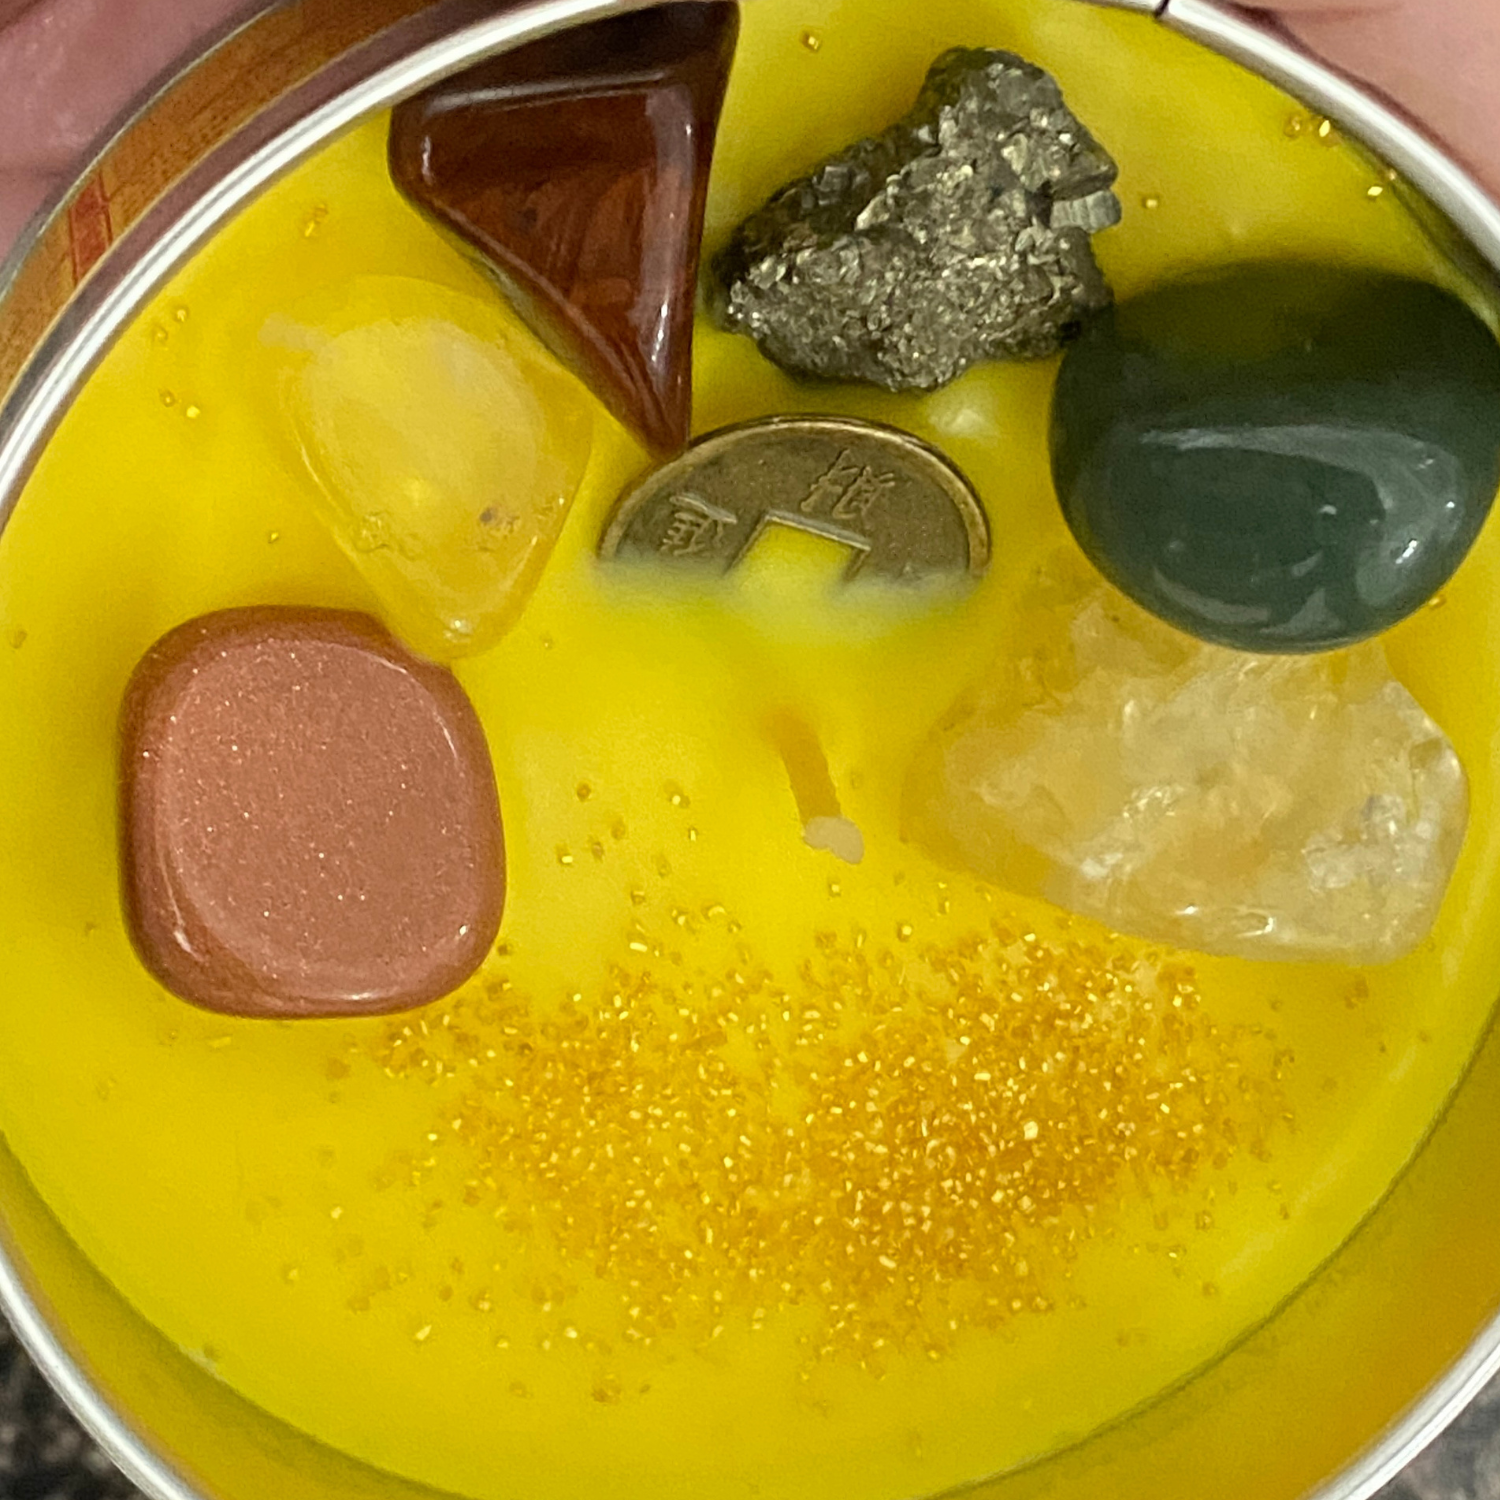 Nag Champa Candle in a Tin With Money Attraction Kit Crystals for Prosperity